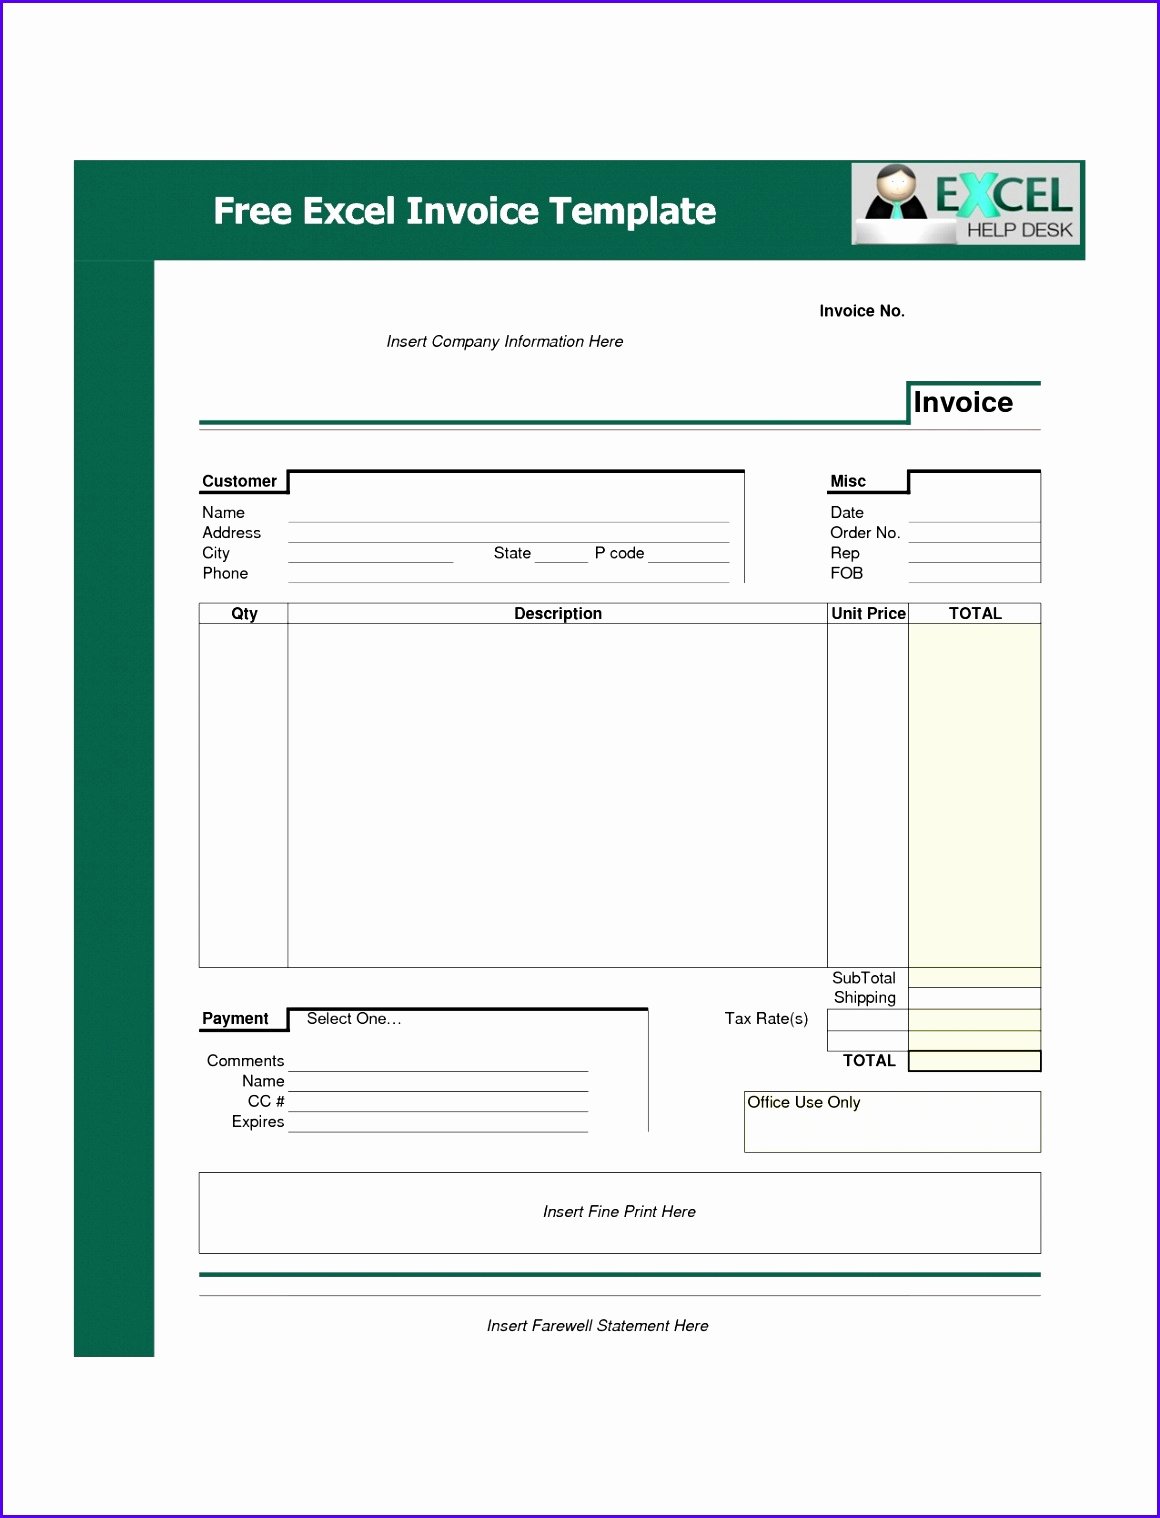 Microsoft Access Invoice Templates New 10 Microsoft Excel Invoice Template Free Download